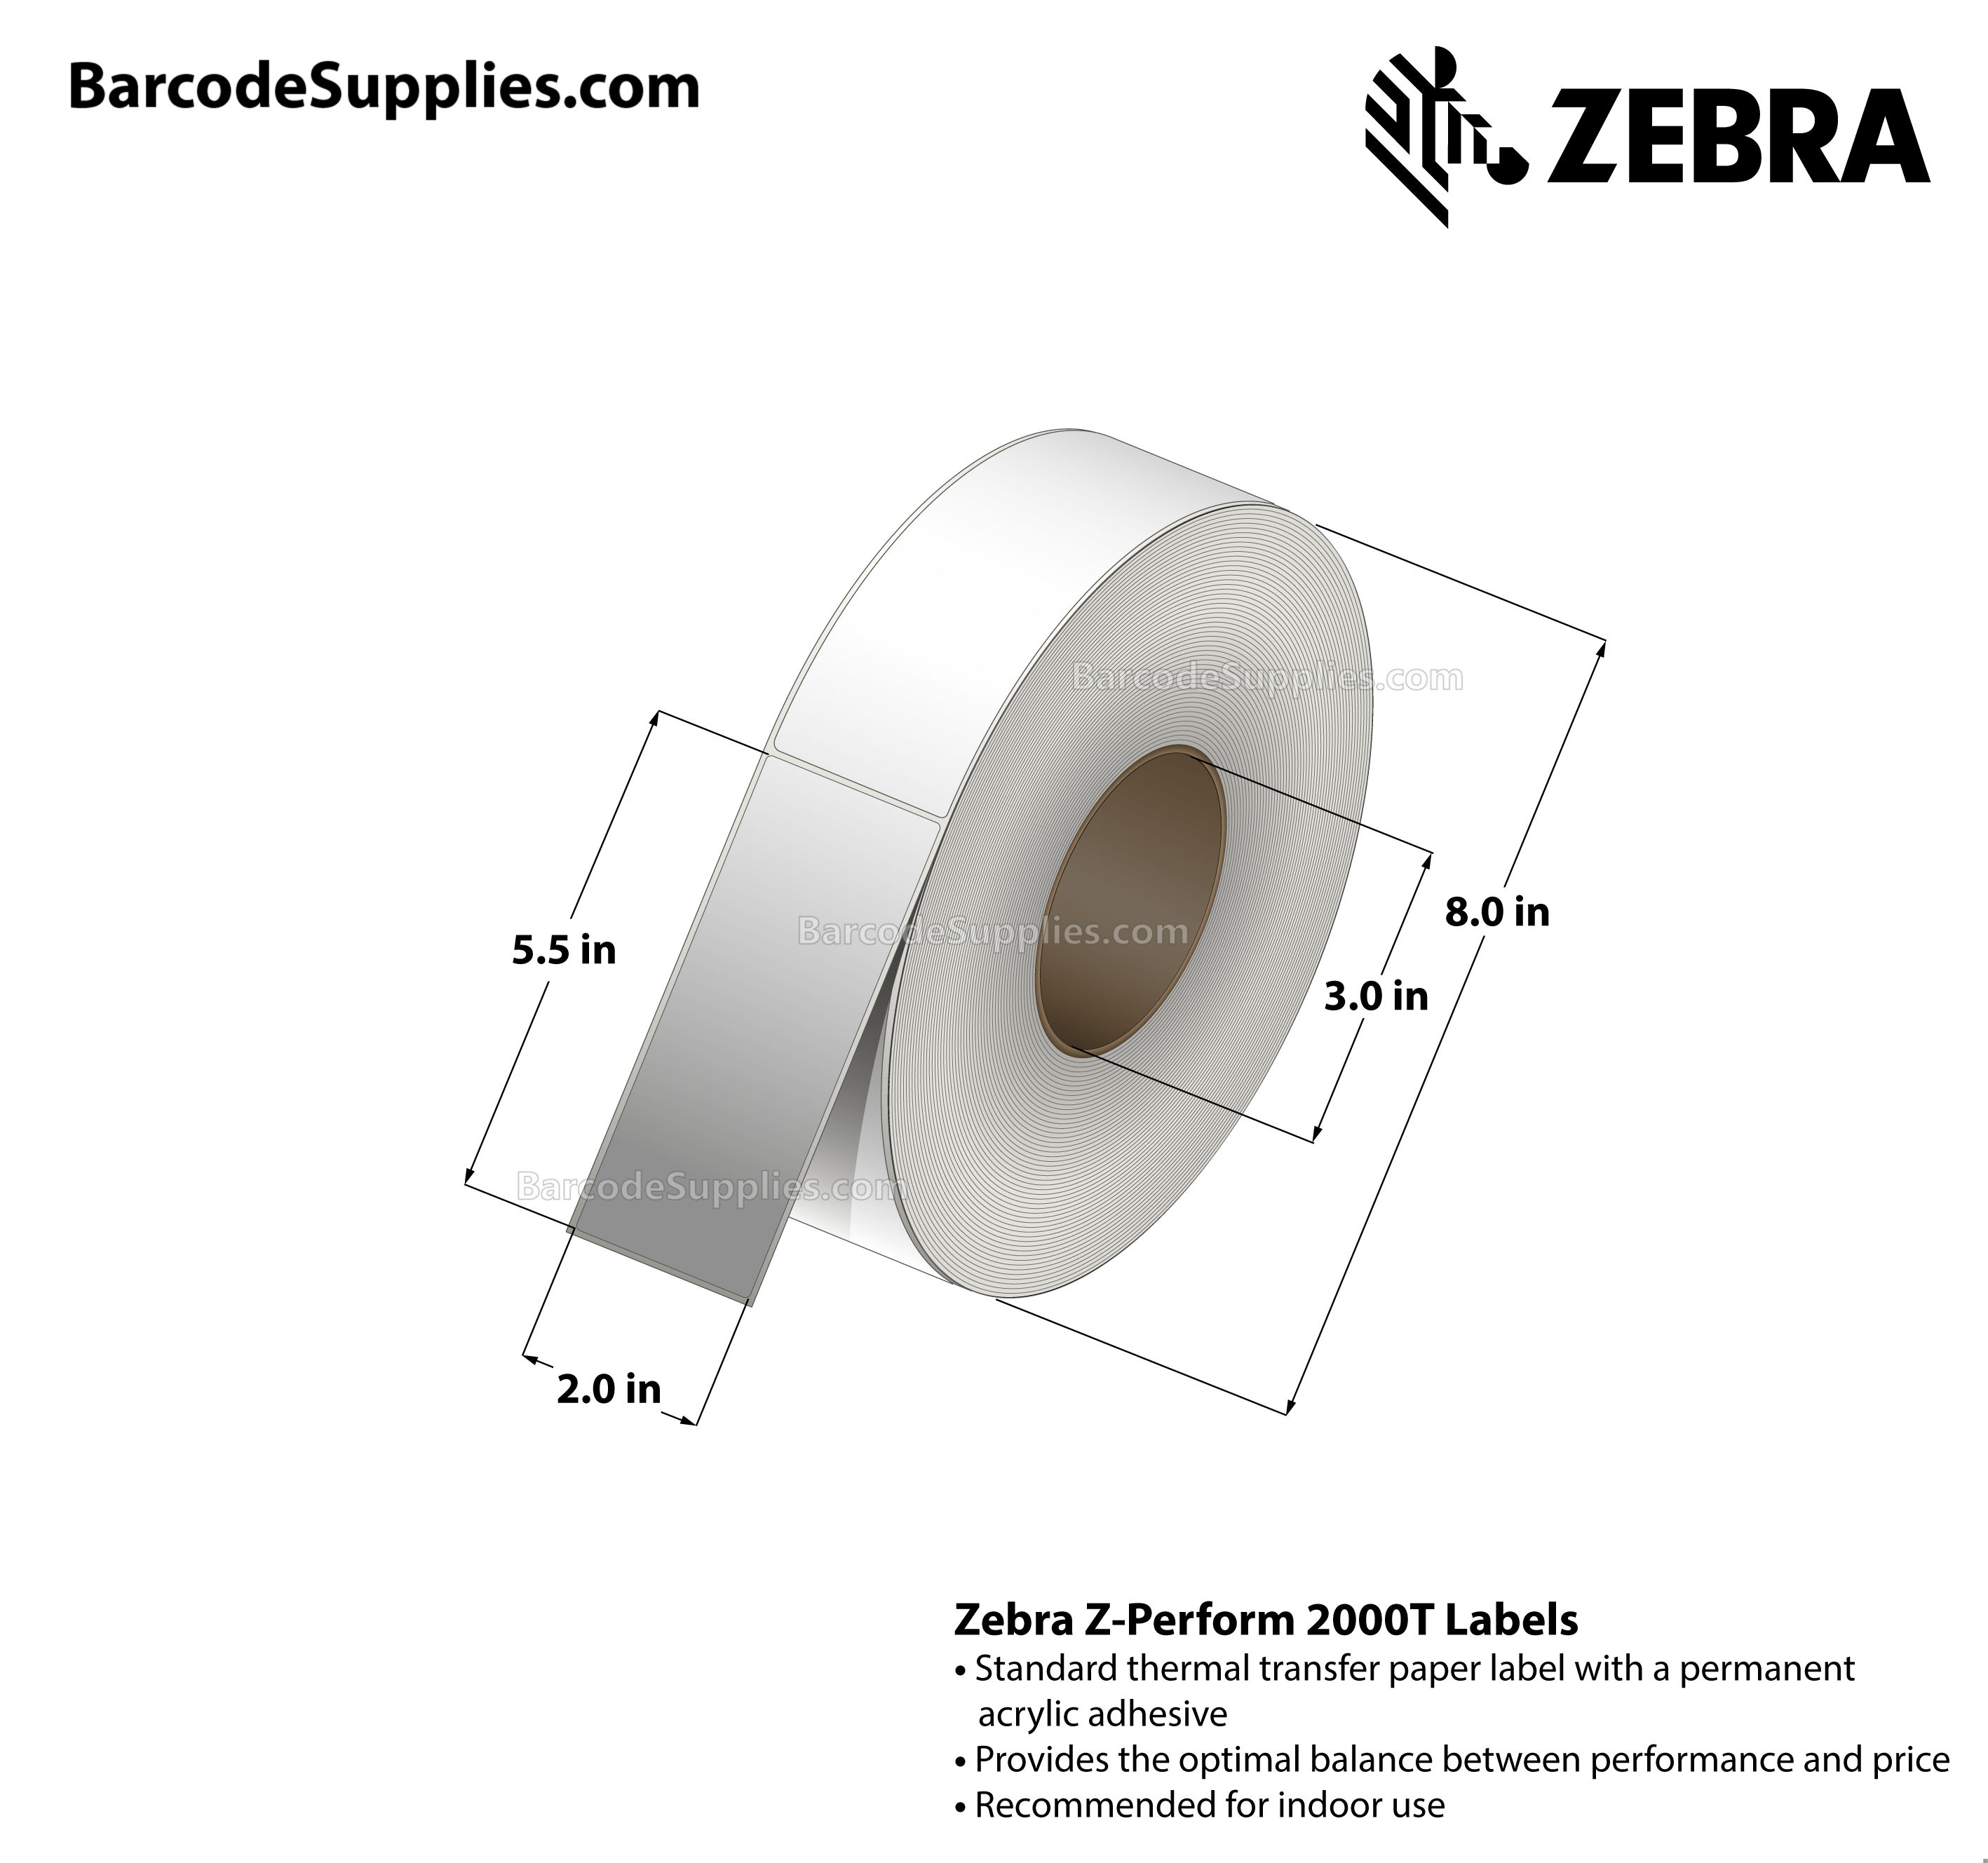 2 x 5.5 Thermal Transfer White Z-Perform 2000T All-Temp Labels With All-Temp Adhesive - Not Perforated - 1050 Labels Per Roll - Carton Of 10 Rolls - 10500 Labels Total - MPN: 72305